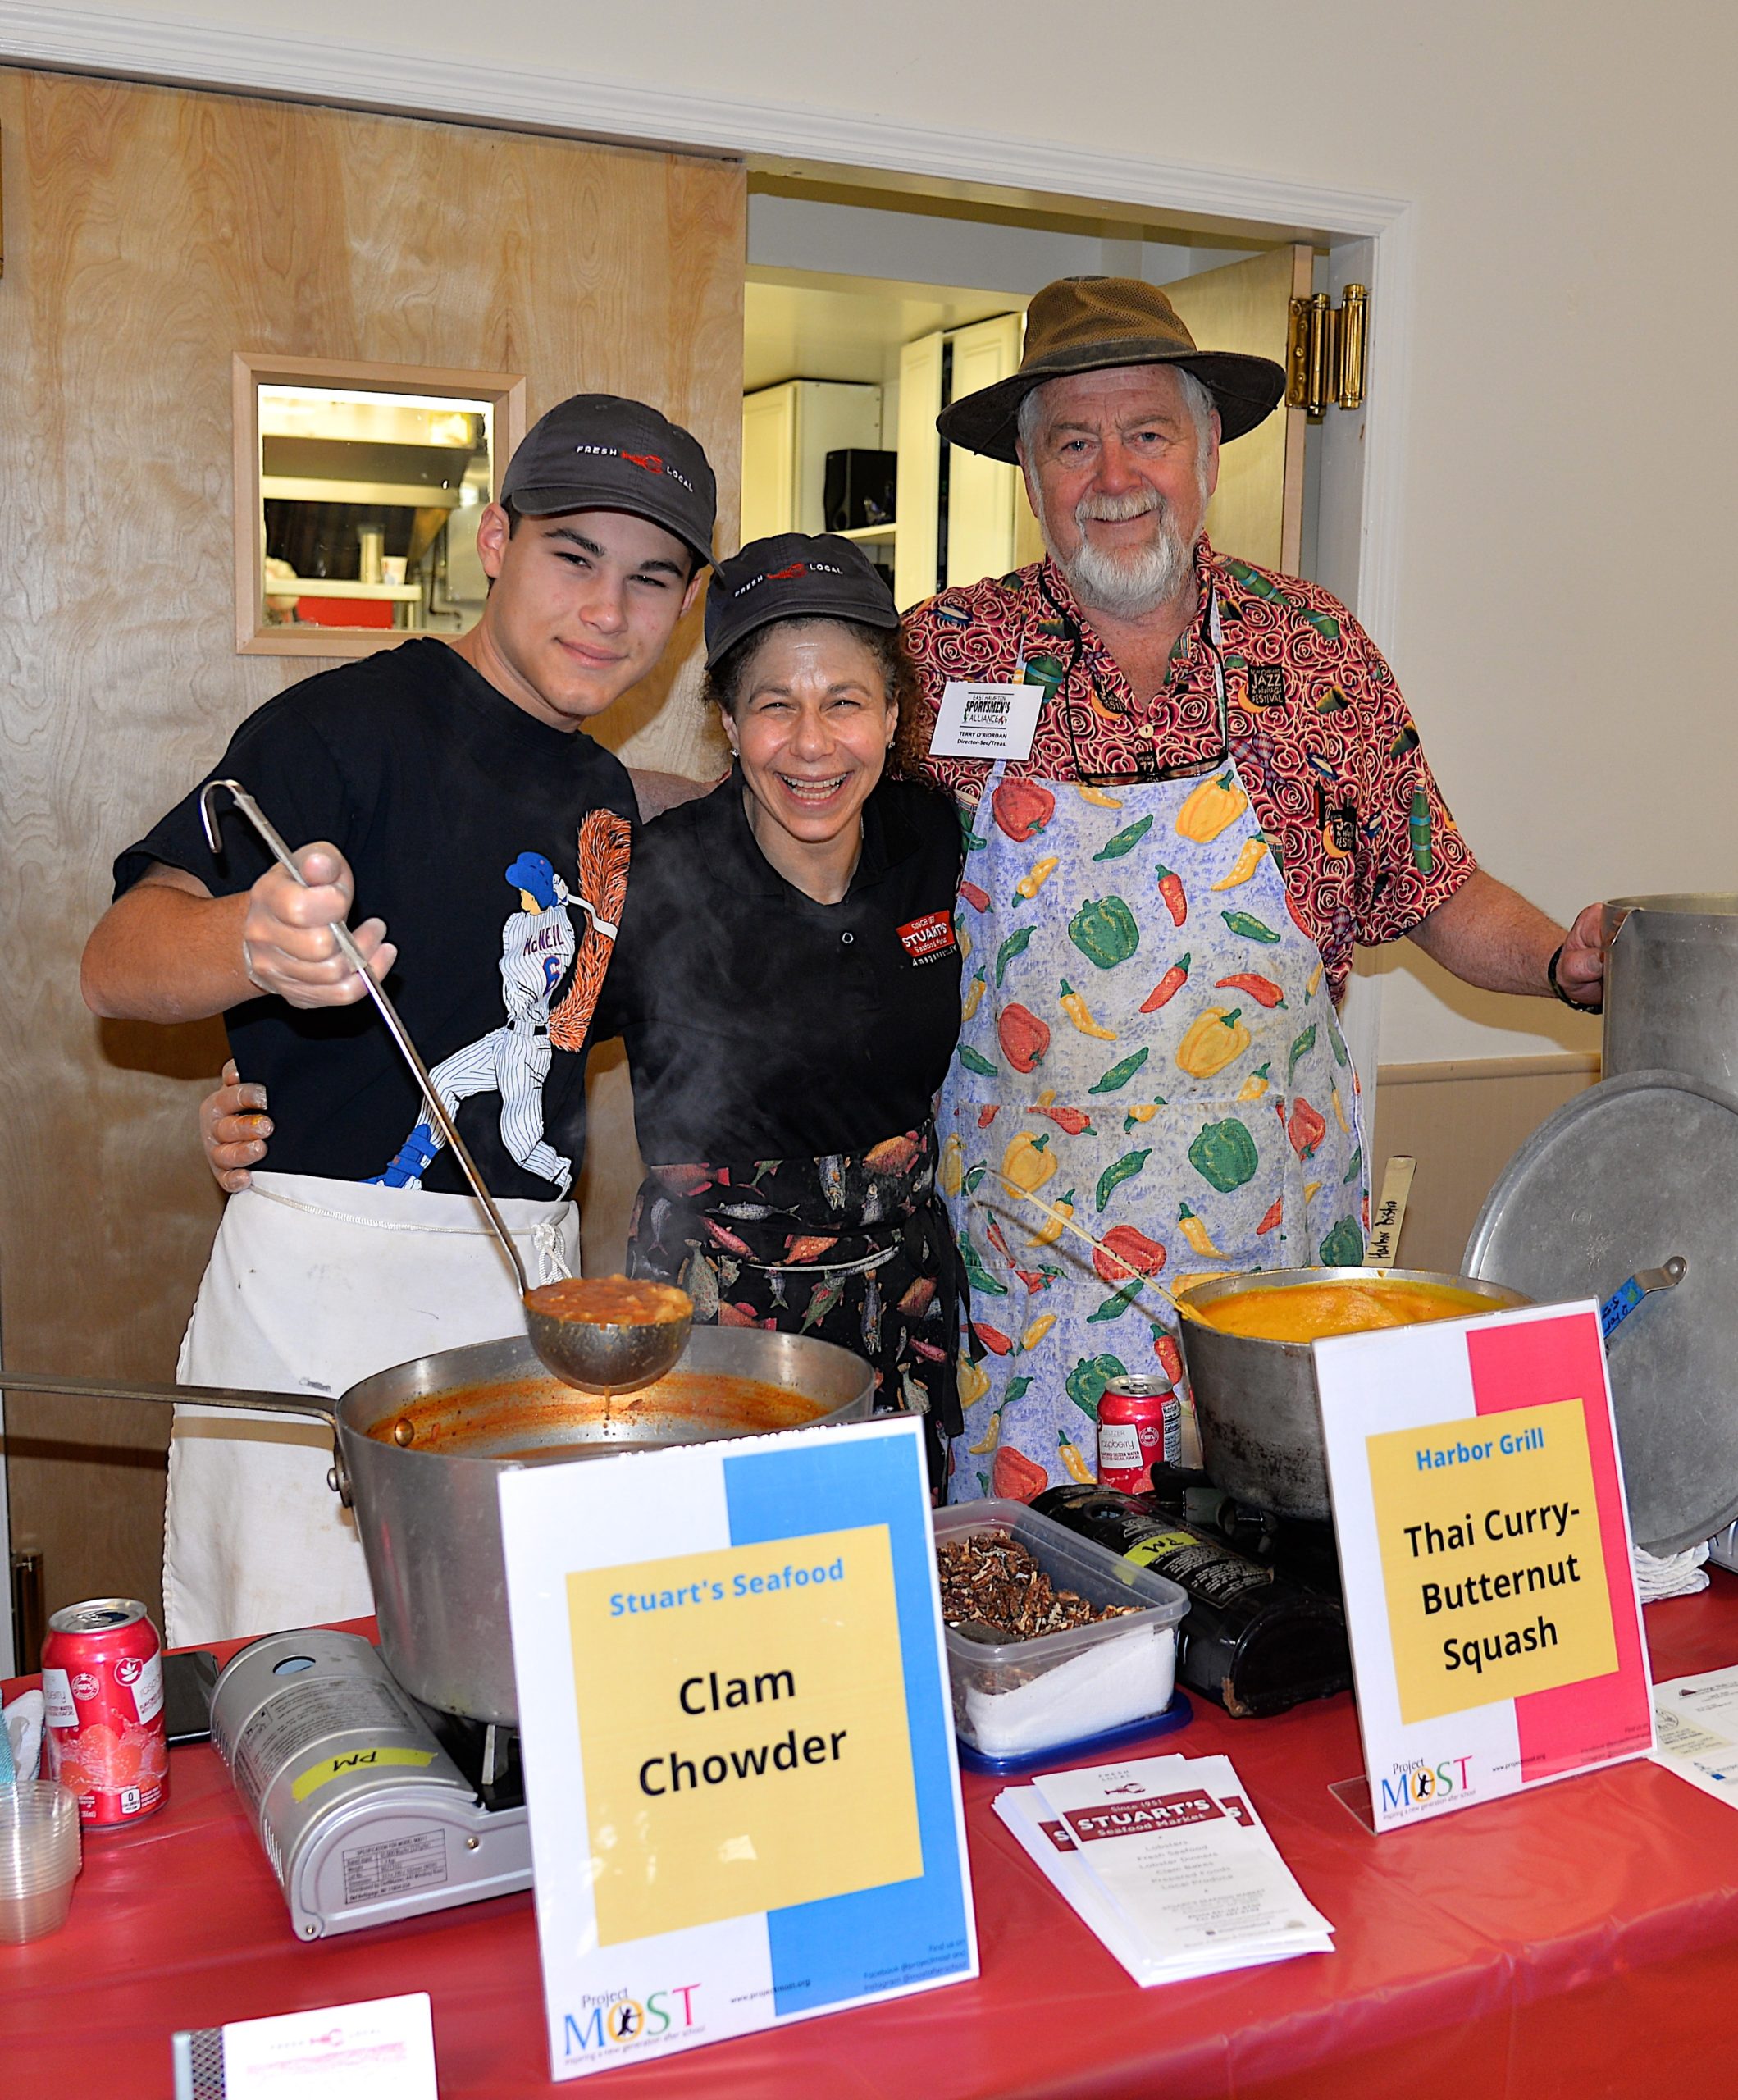 Empty Bowls, a fundraiser for Project Most, with soups from local chefs and restaurants took place at the Amagansett American Legion hall on Sunday. Dante and Charlotte Sasso, and  Terry O’Riordan serving up their soup. KYRIL BROMLEY